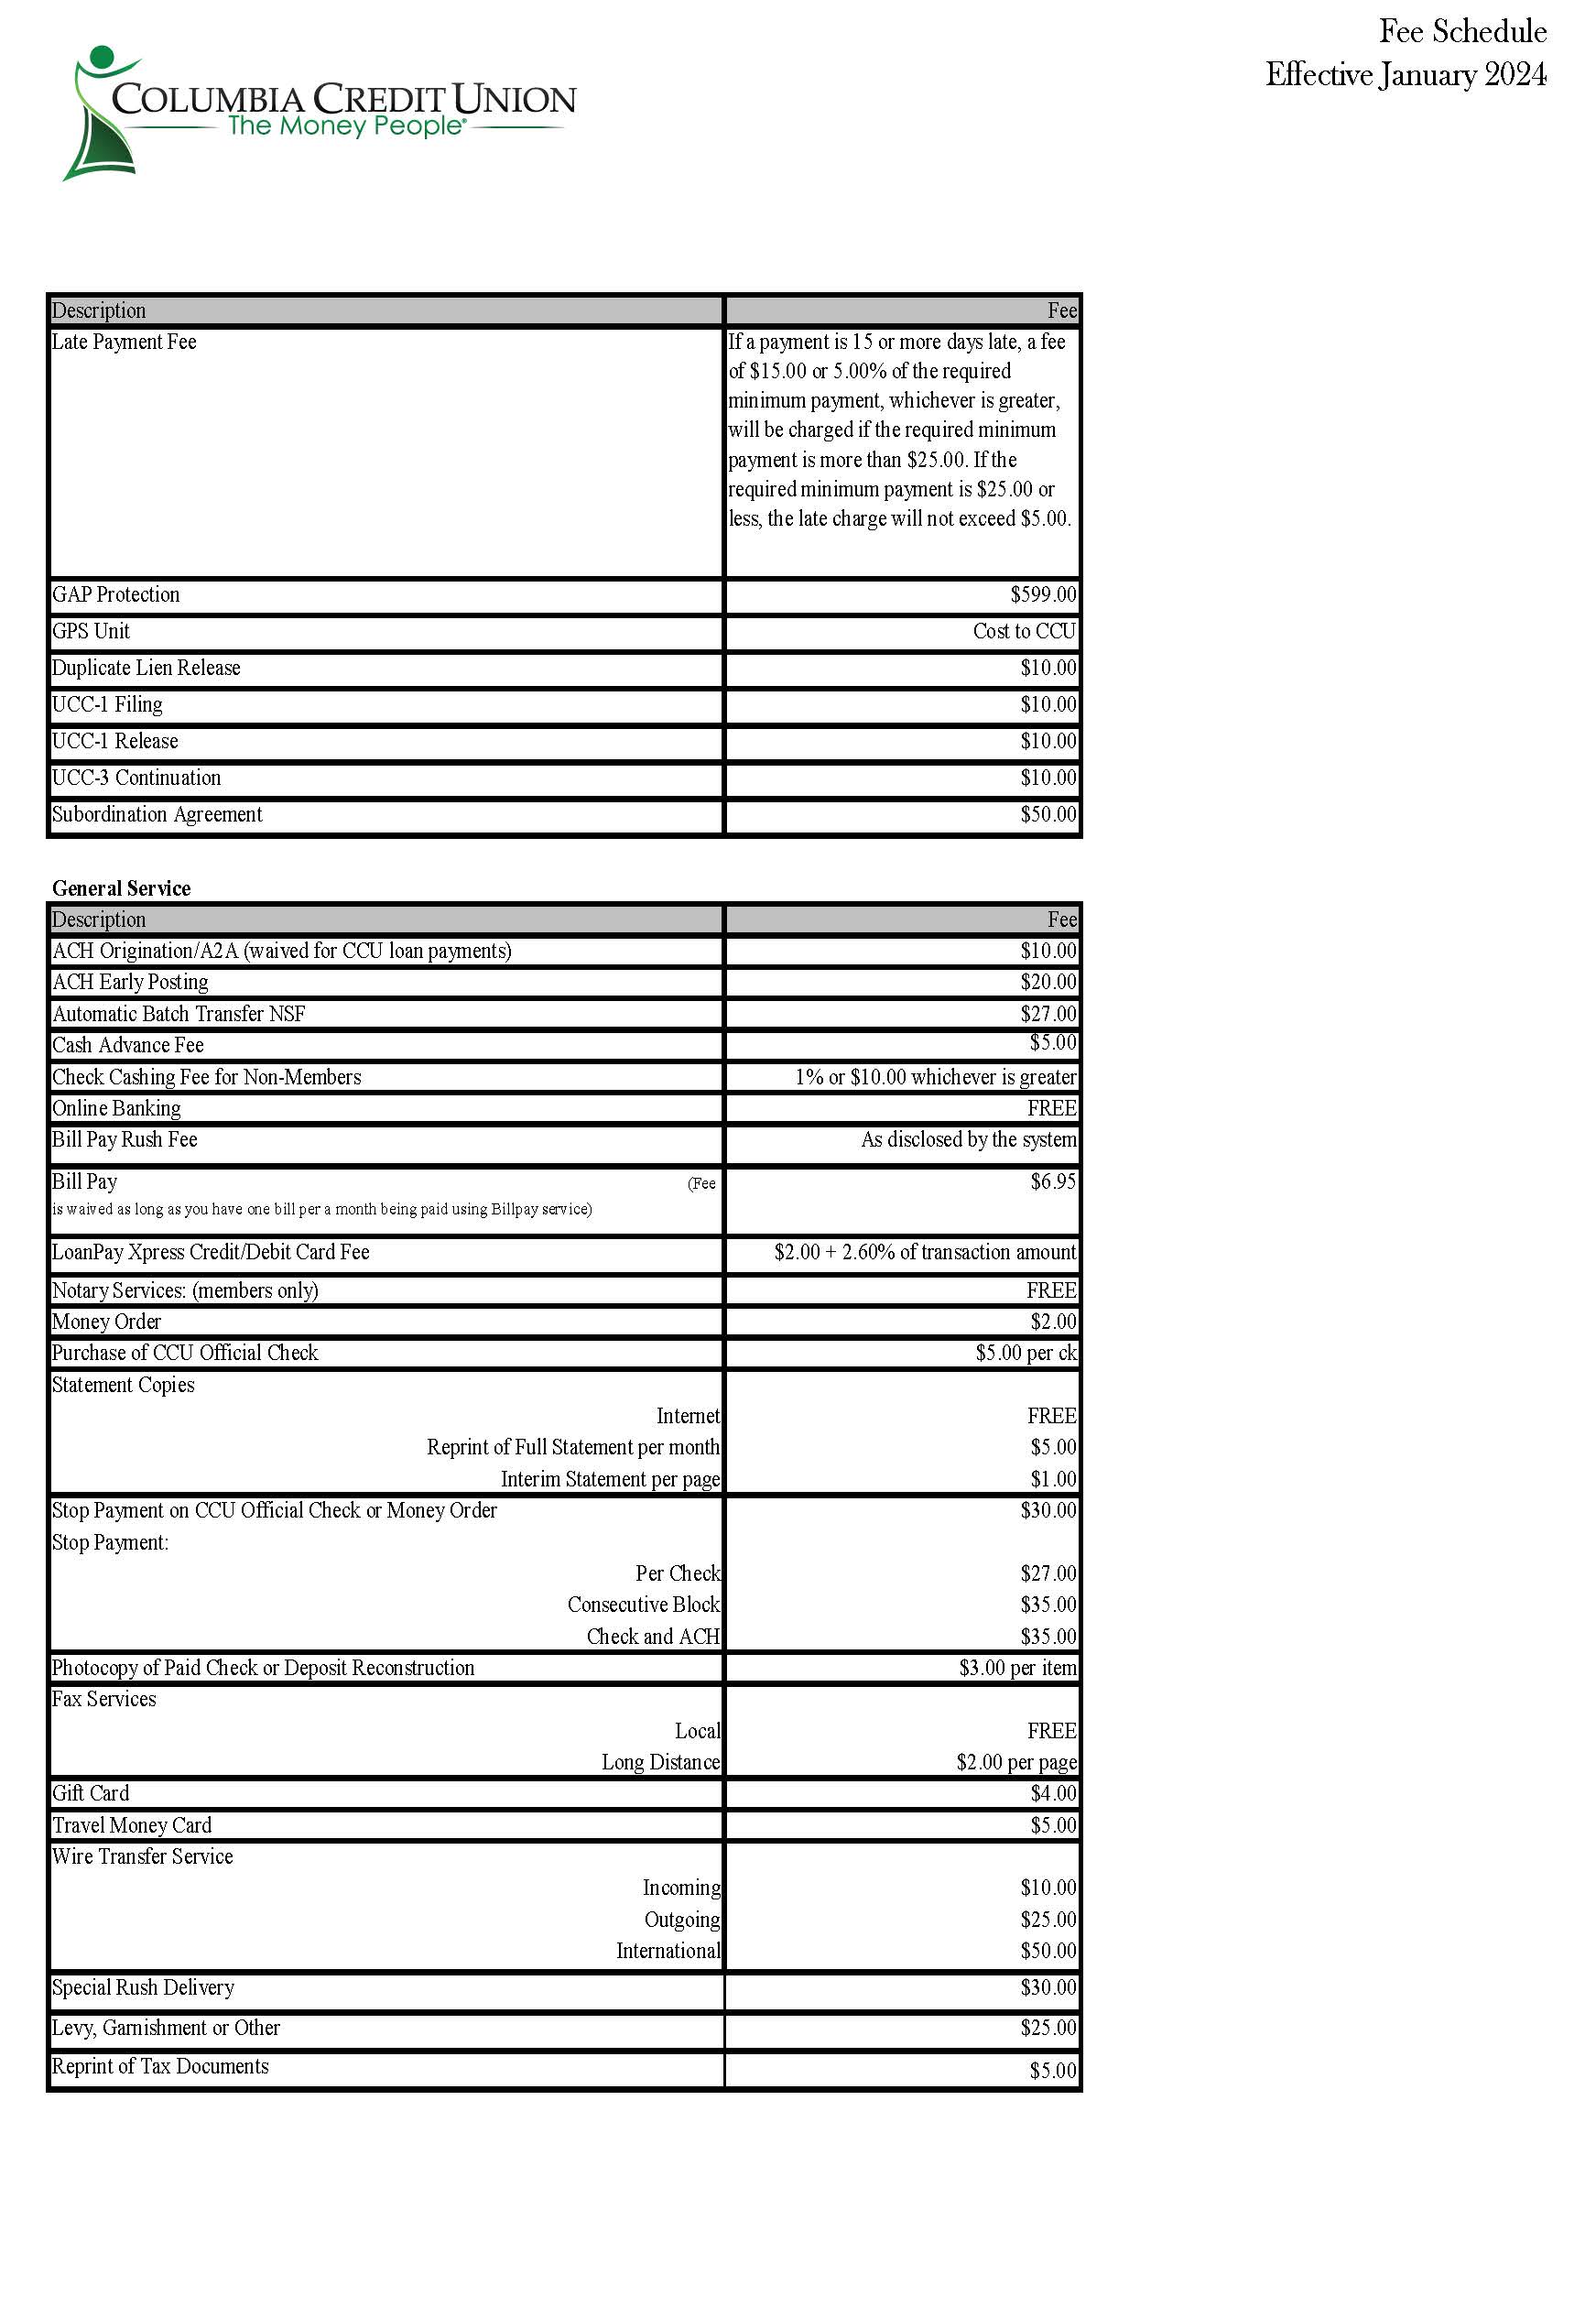 Fee Schedule 2024 Page 2 